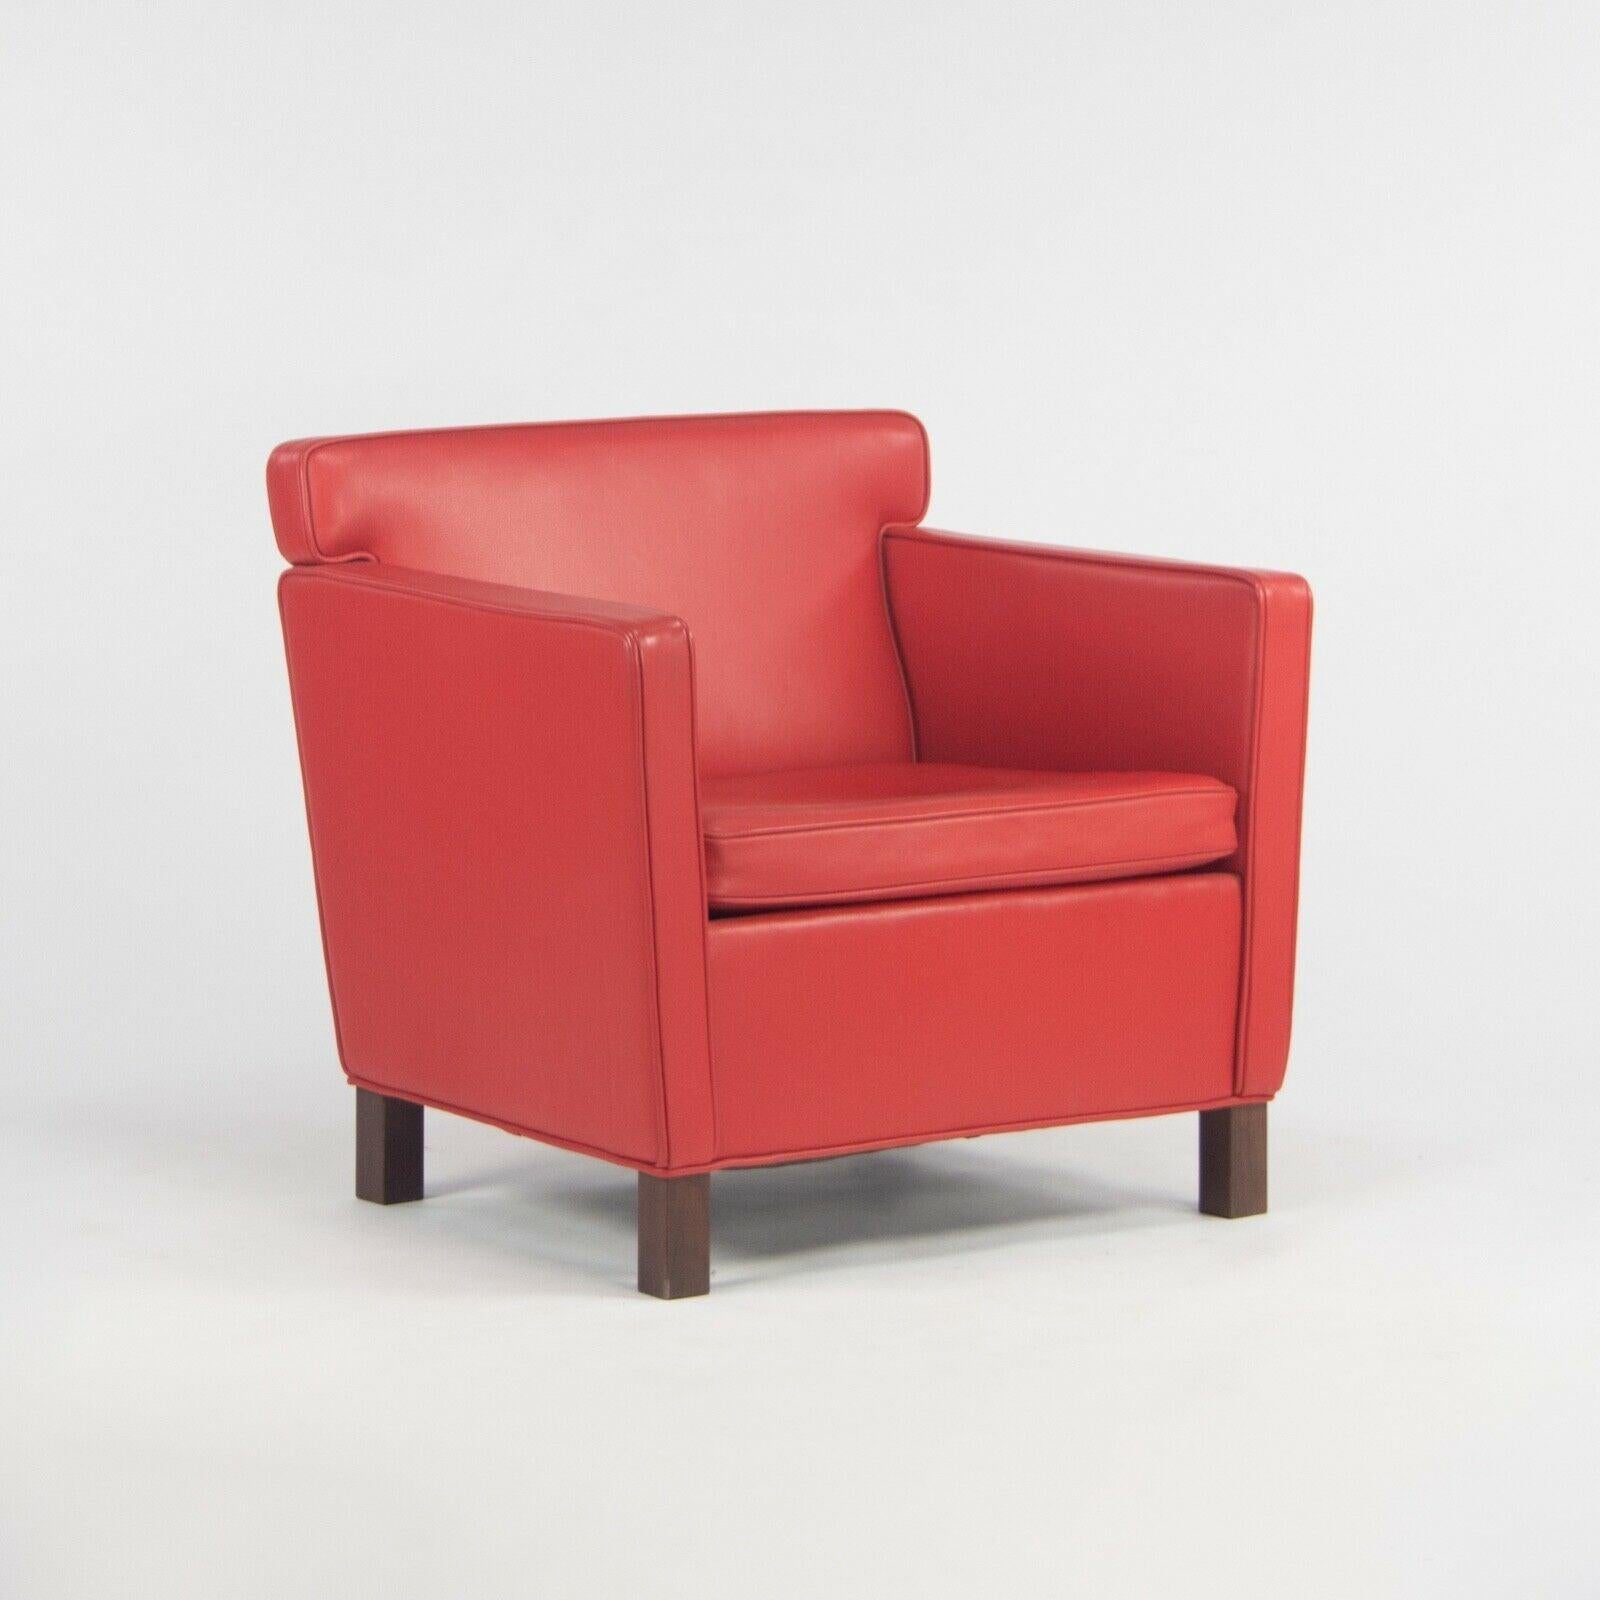 Modern C. 2009 Pair of Mies Van Der Rohe Knoll Krefeld Lounge Chairs in Red Leather For Sale